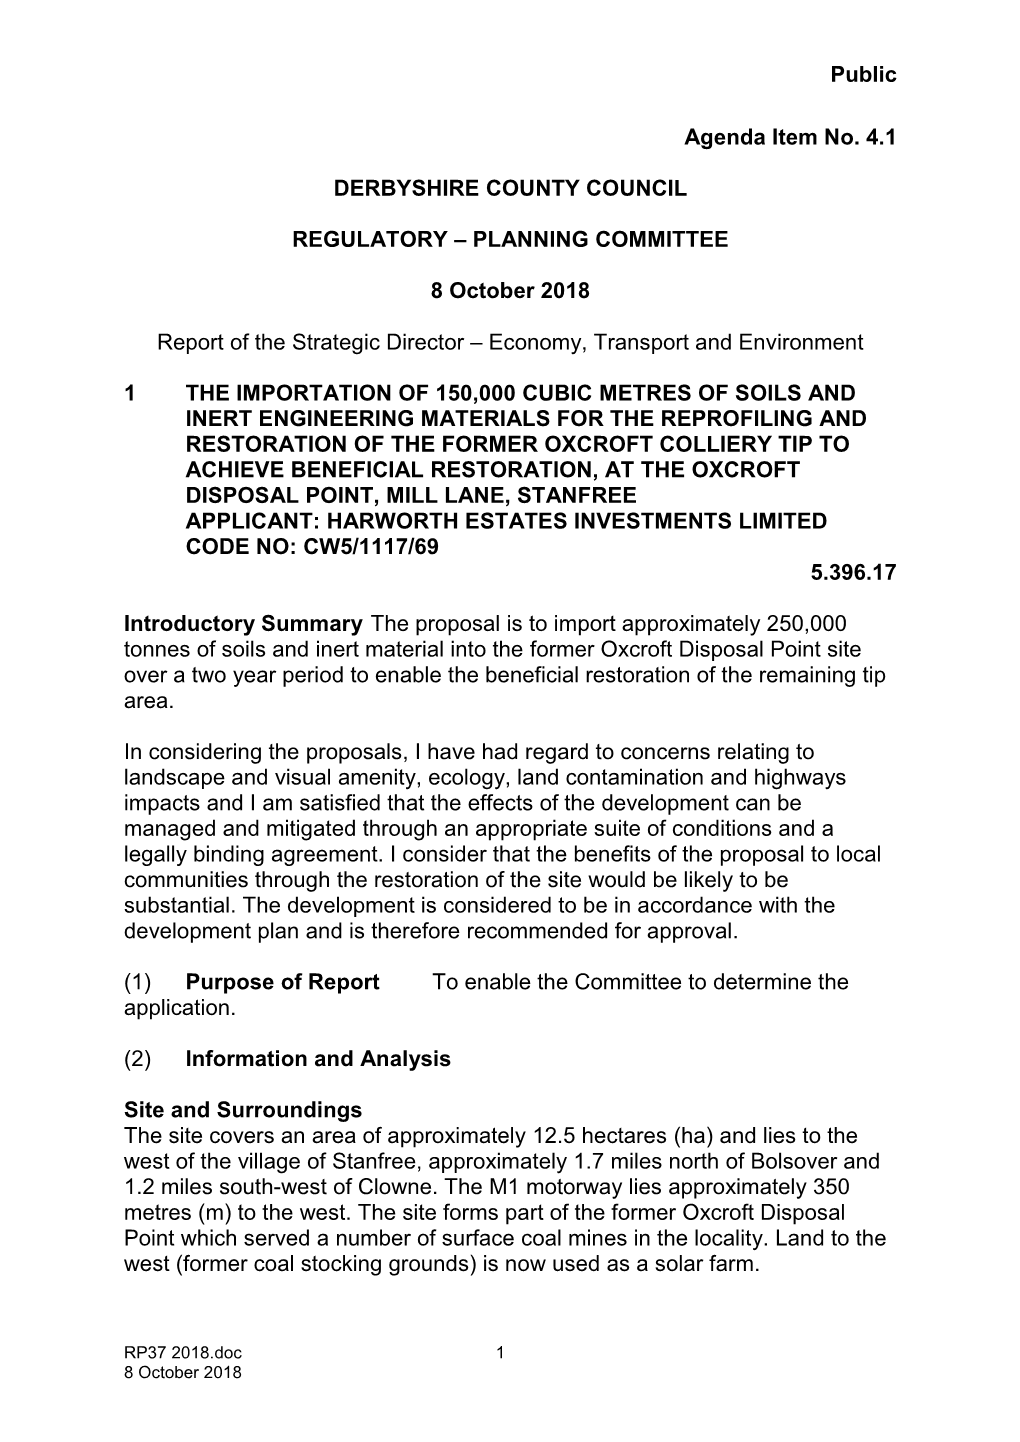 08-10-2018 the Importation of Soils Oxcroft Colliery